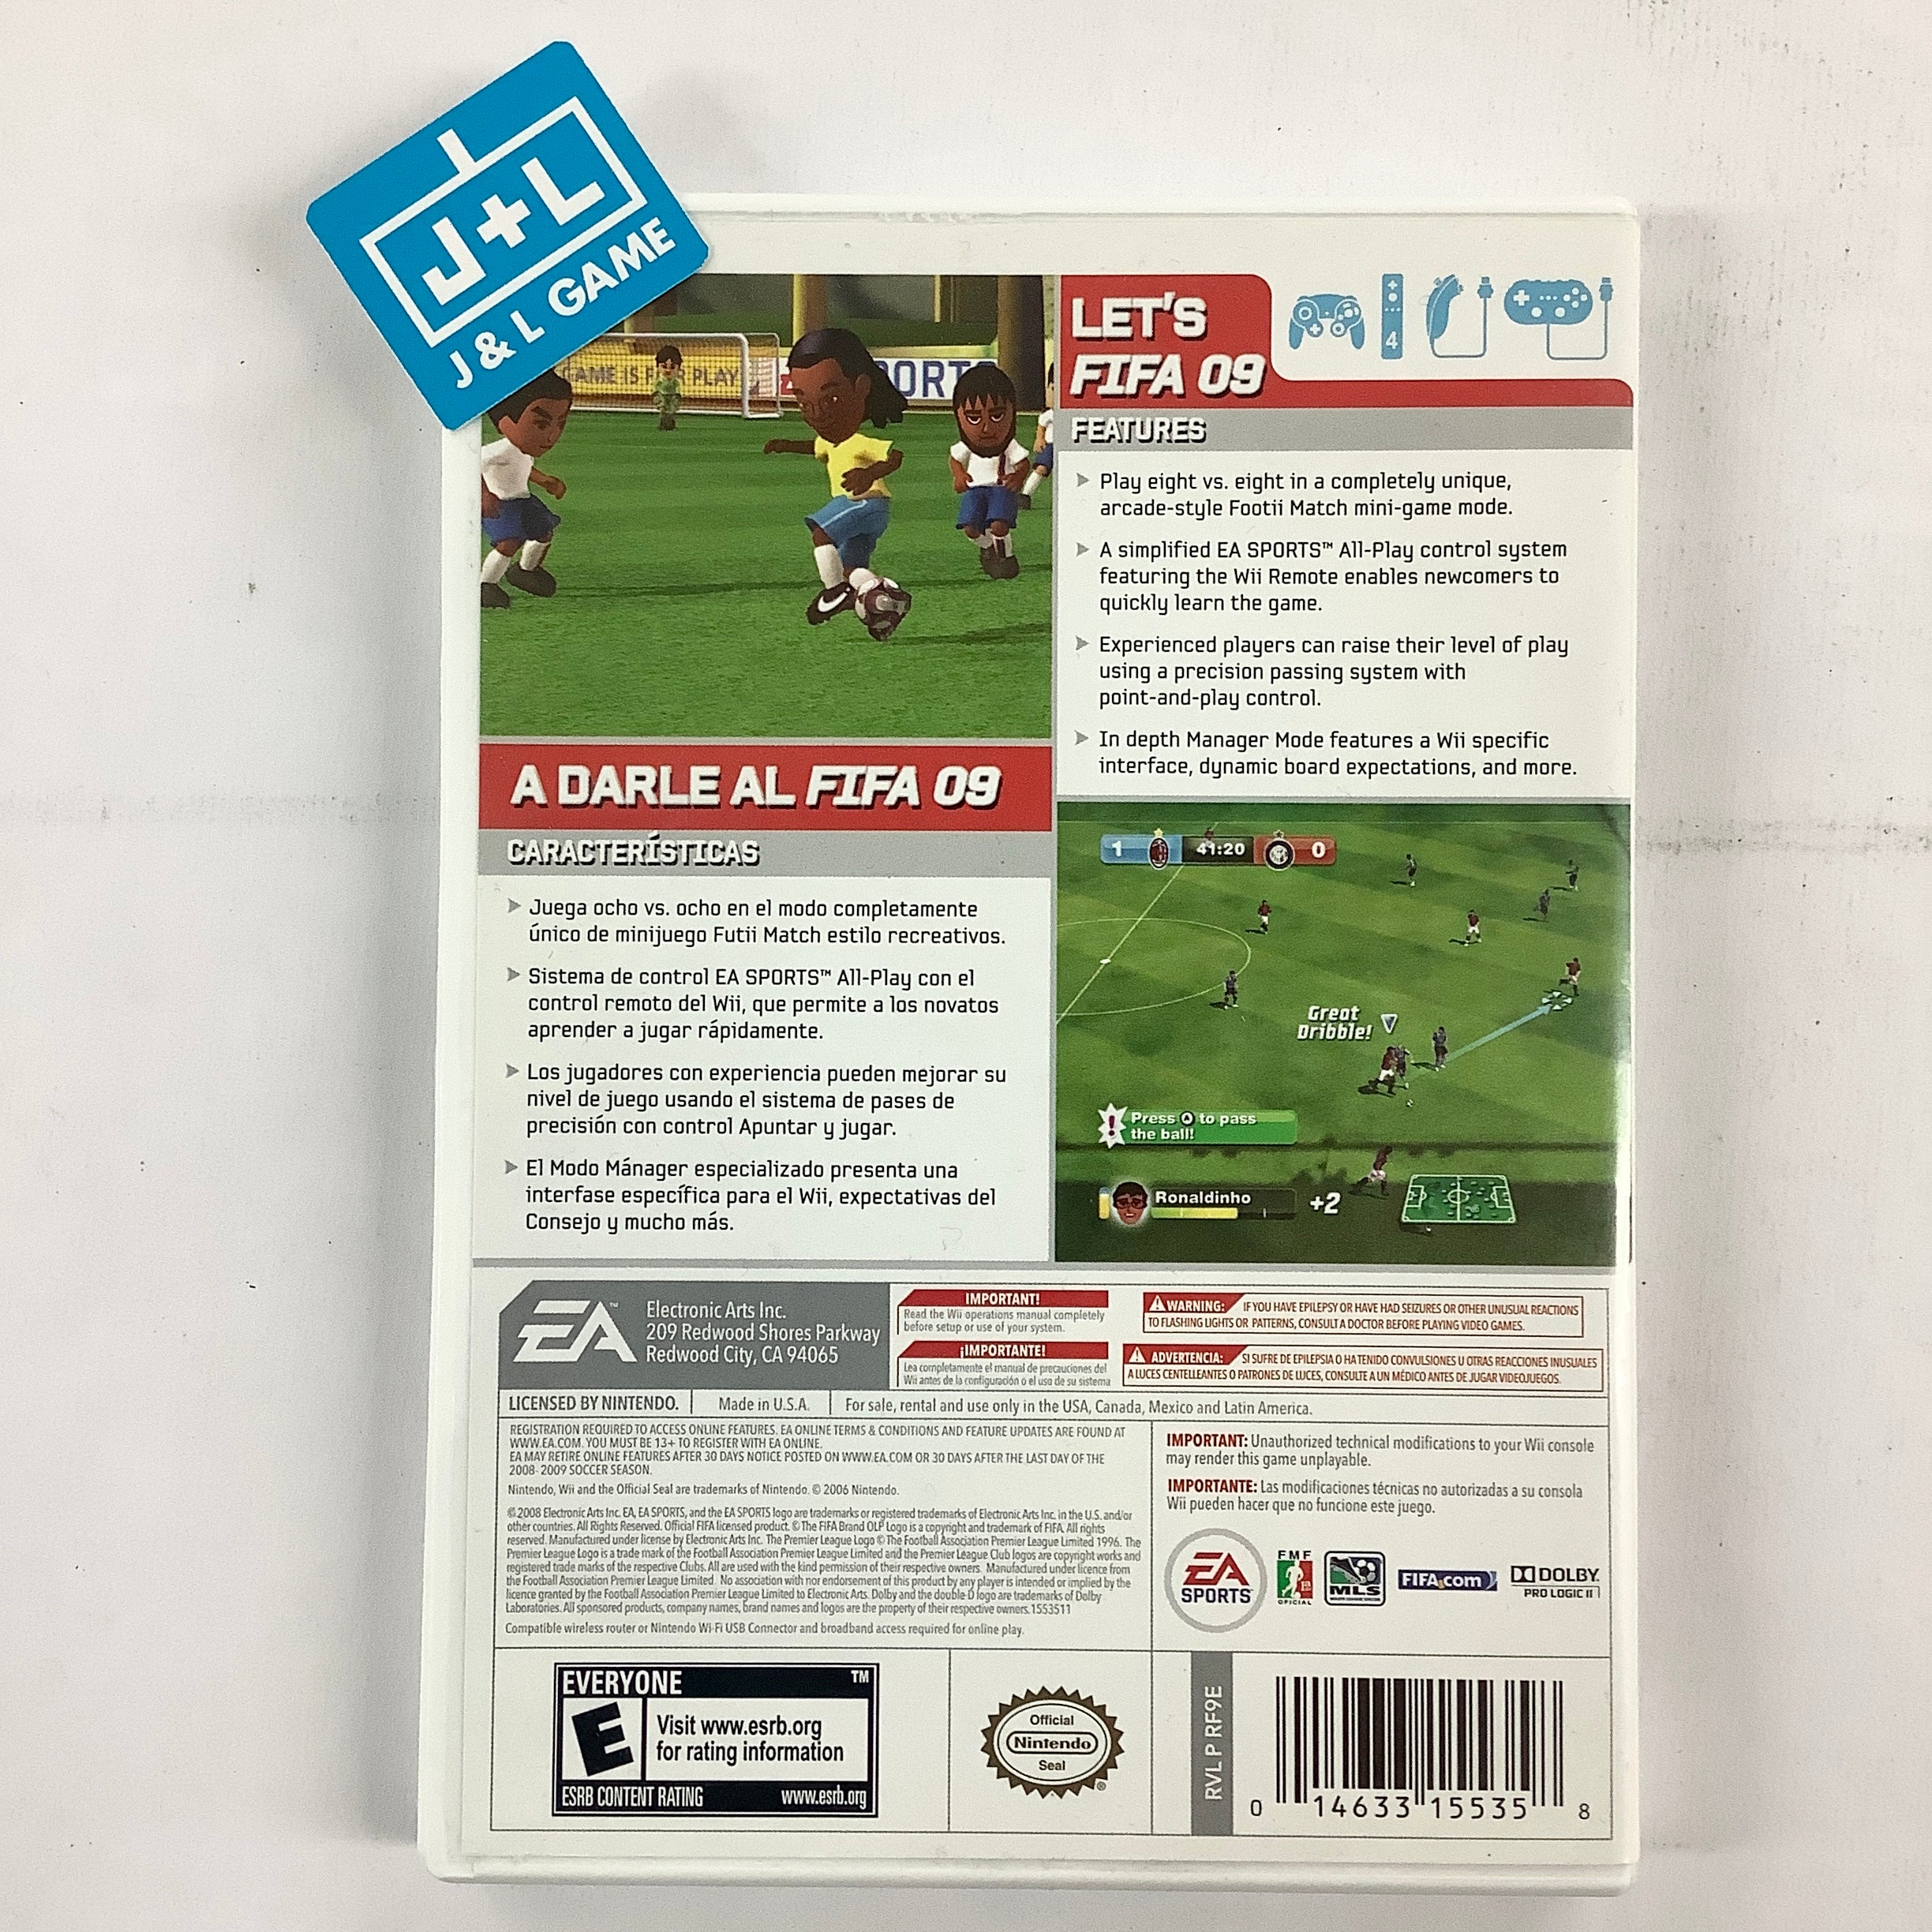 FIFA Soccer 09 All-Play - Nintendo Wii [Pre-Owned] Video Games EA Sports   